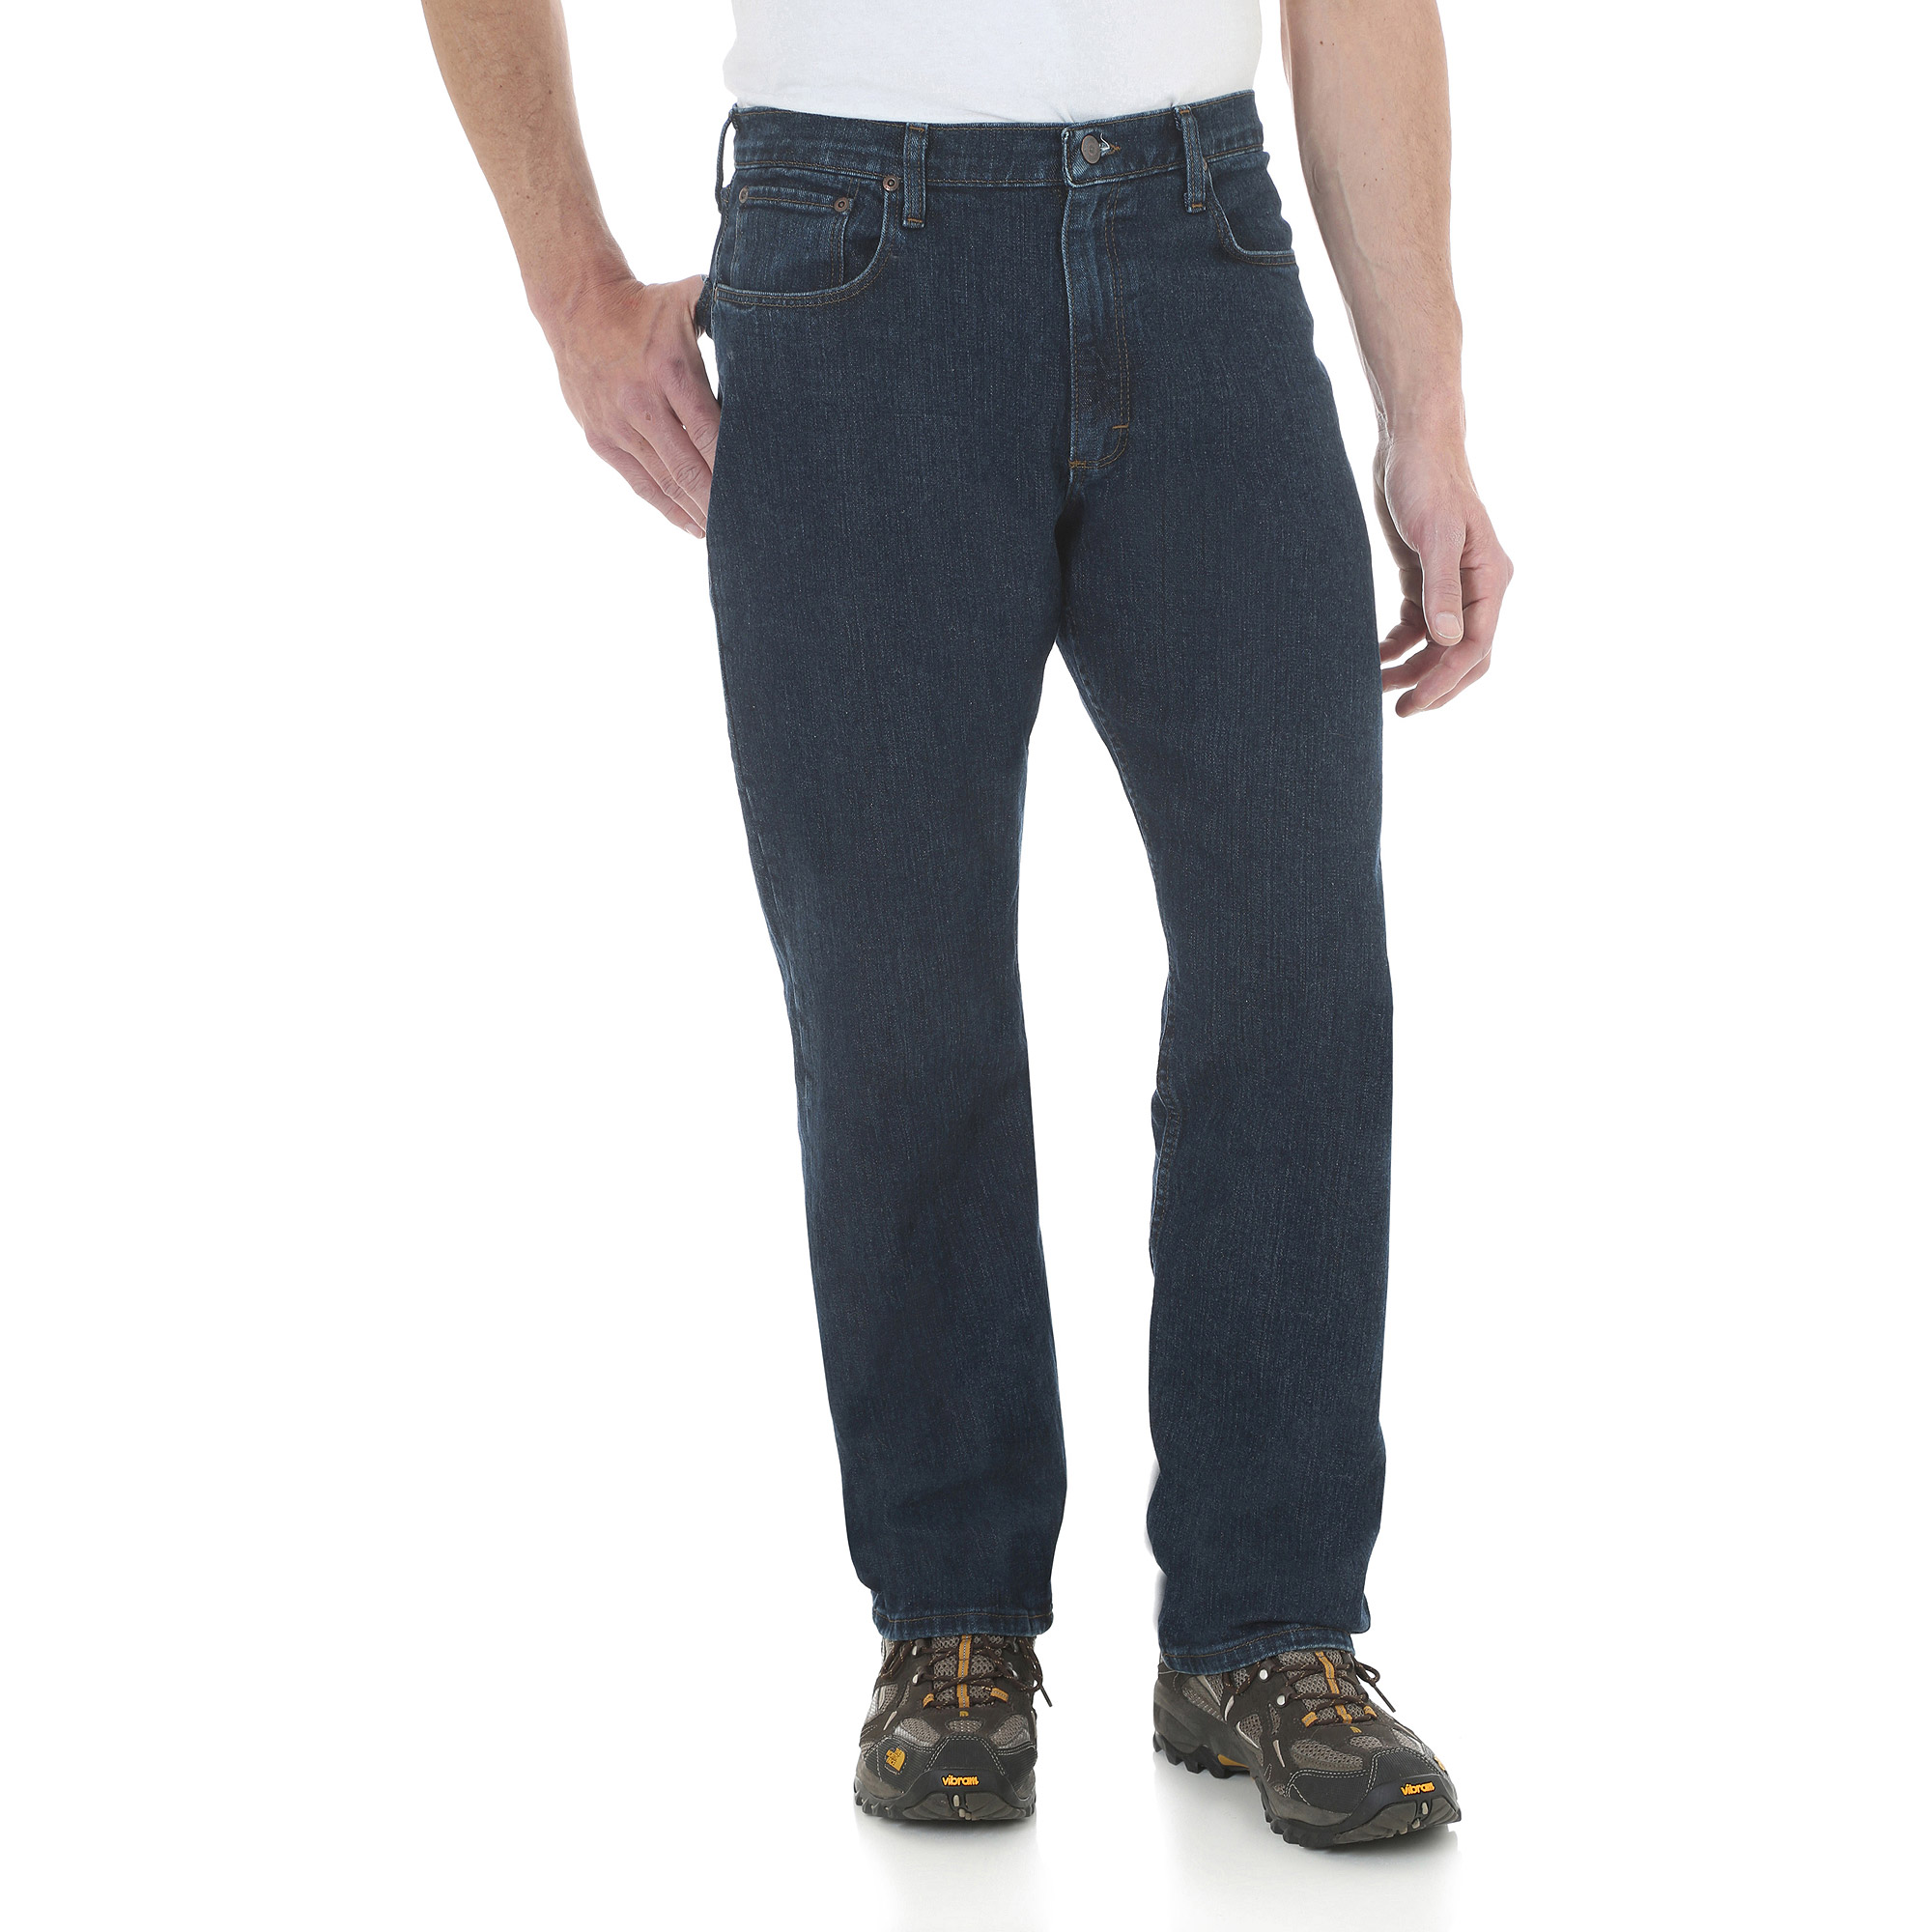 Men's Advanced Comfort Relaxed Fit Jean - image 1 of 1